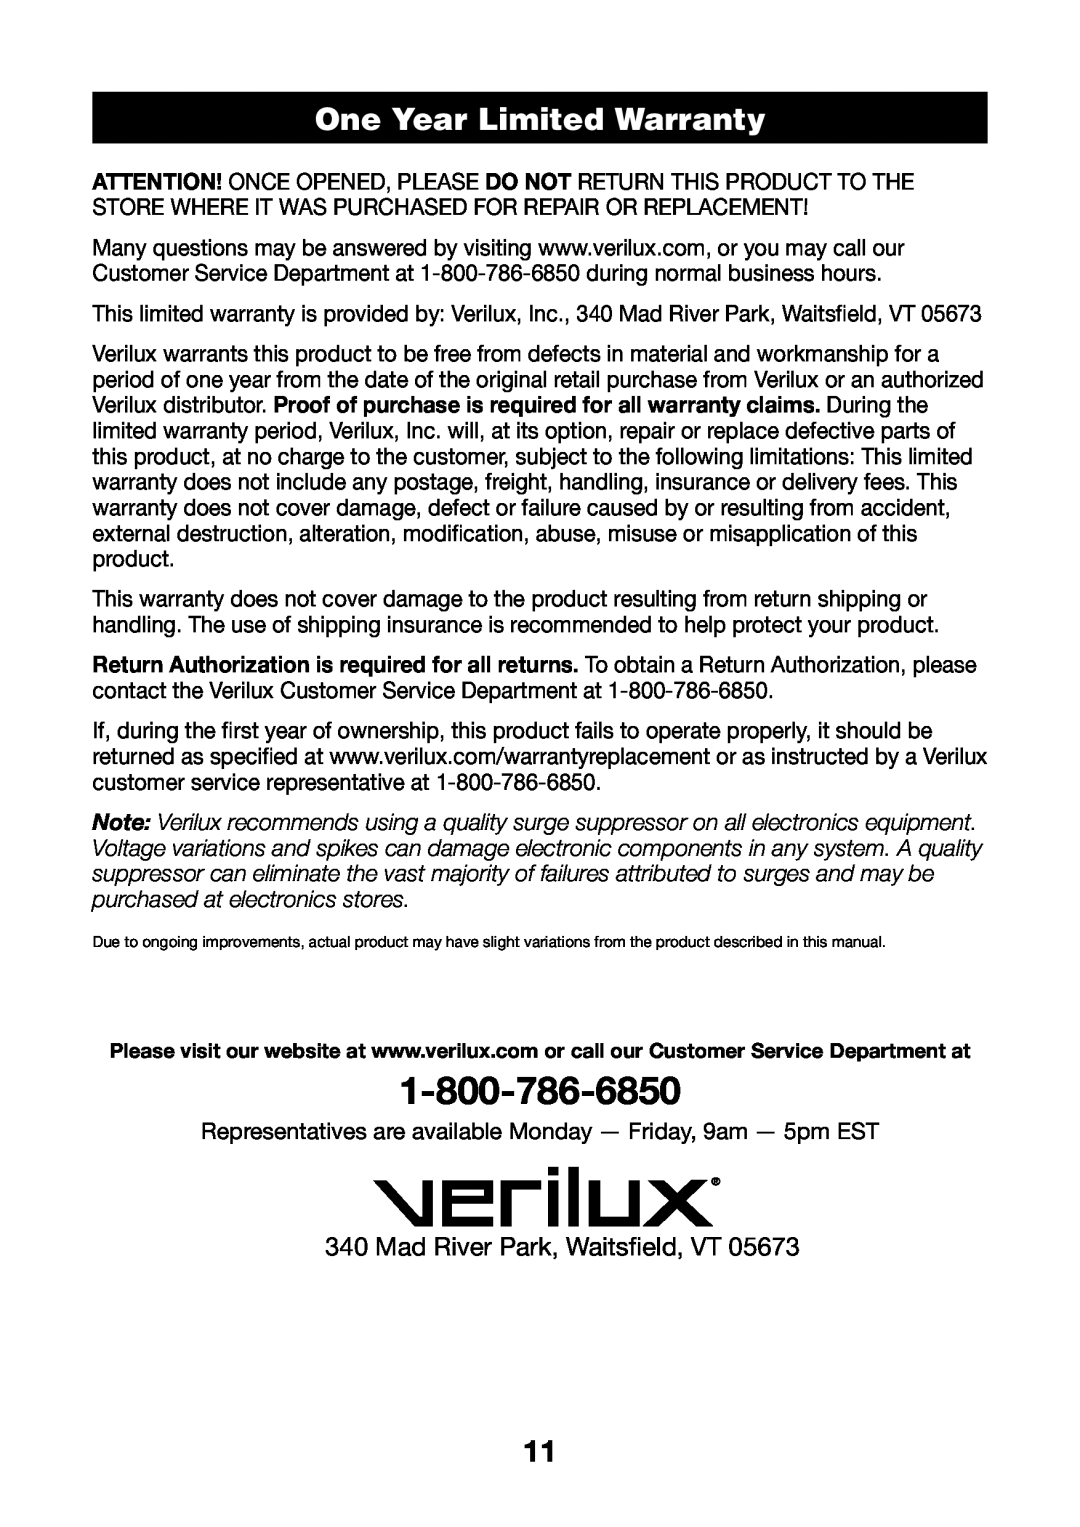 Verilux VF03 manual One Year Limited Warranty, Mad River Park, Waitsfield, VT 